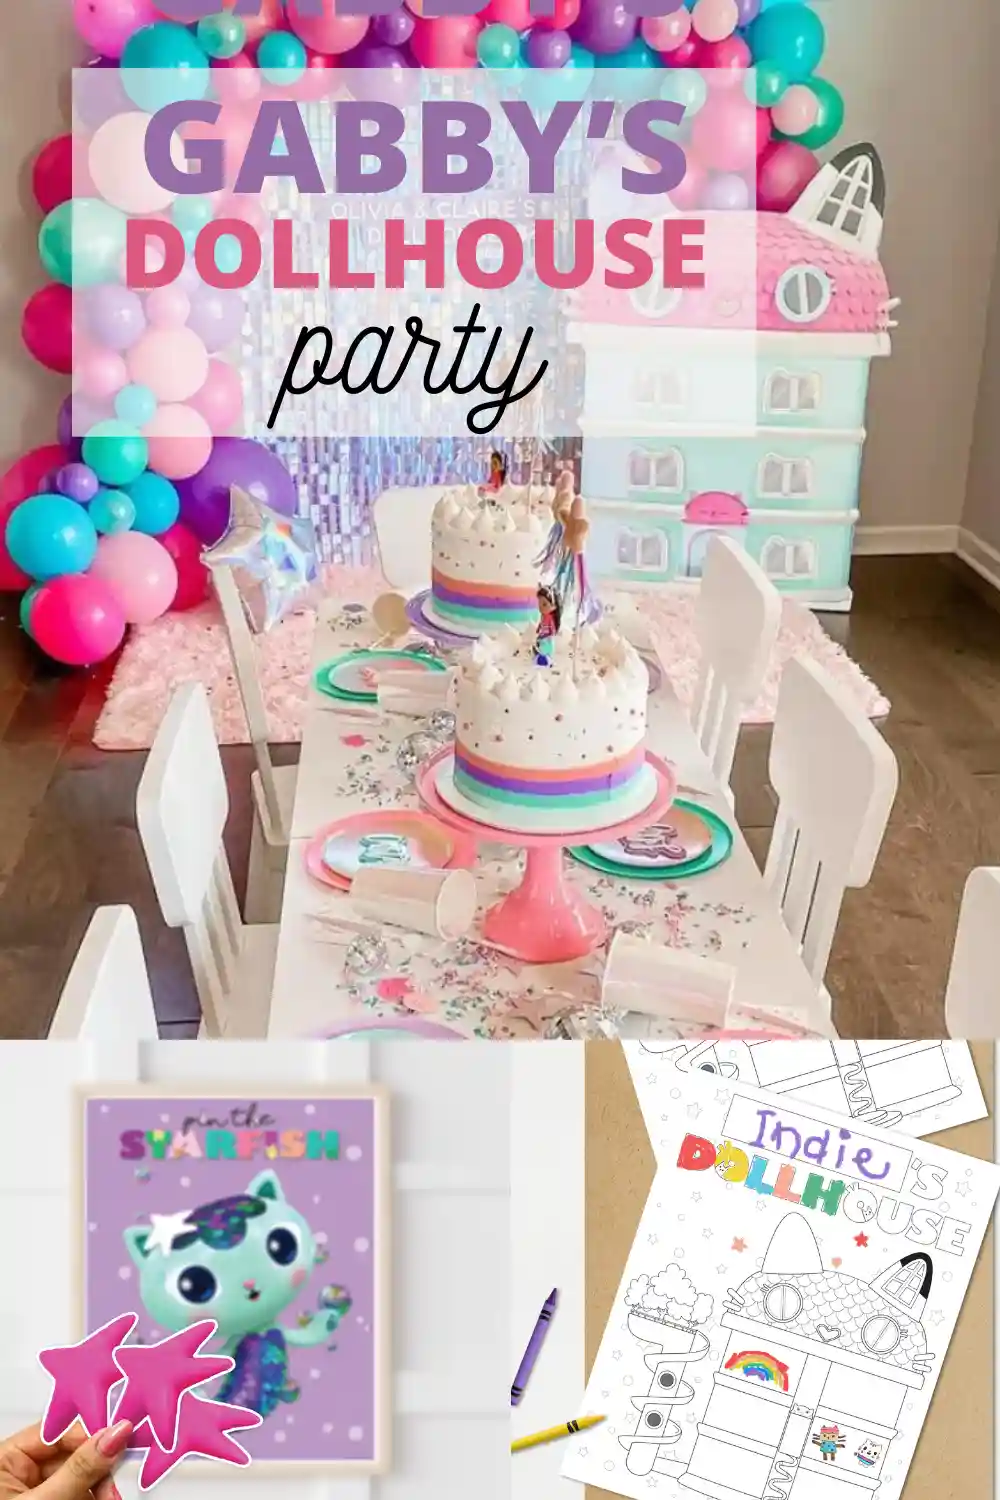 Gabby's Dollhouse party ideas to help you easily plan a Gabby's Dollhouse birthday party for your toddler. Ideas for Gabby's Dollhouse games, Gabby's Dollhouse decortations, Gabby's Dollhouse cupcakes, Gabby's Dollhouse activities, and more!